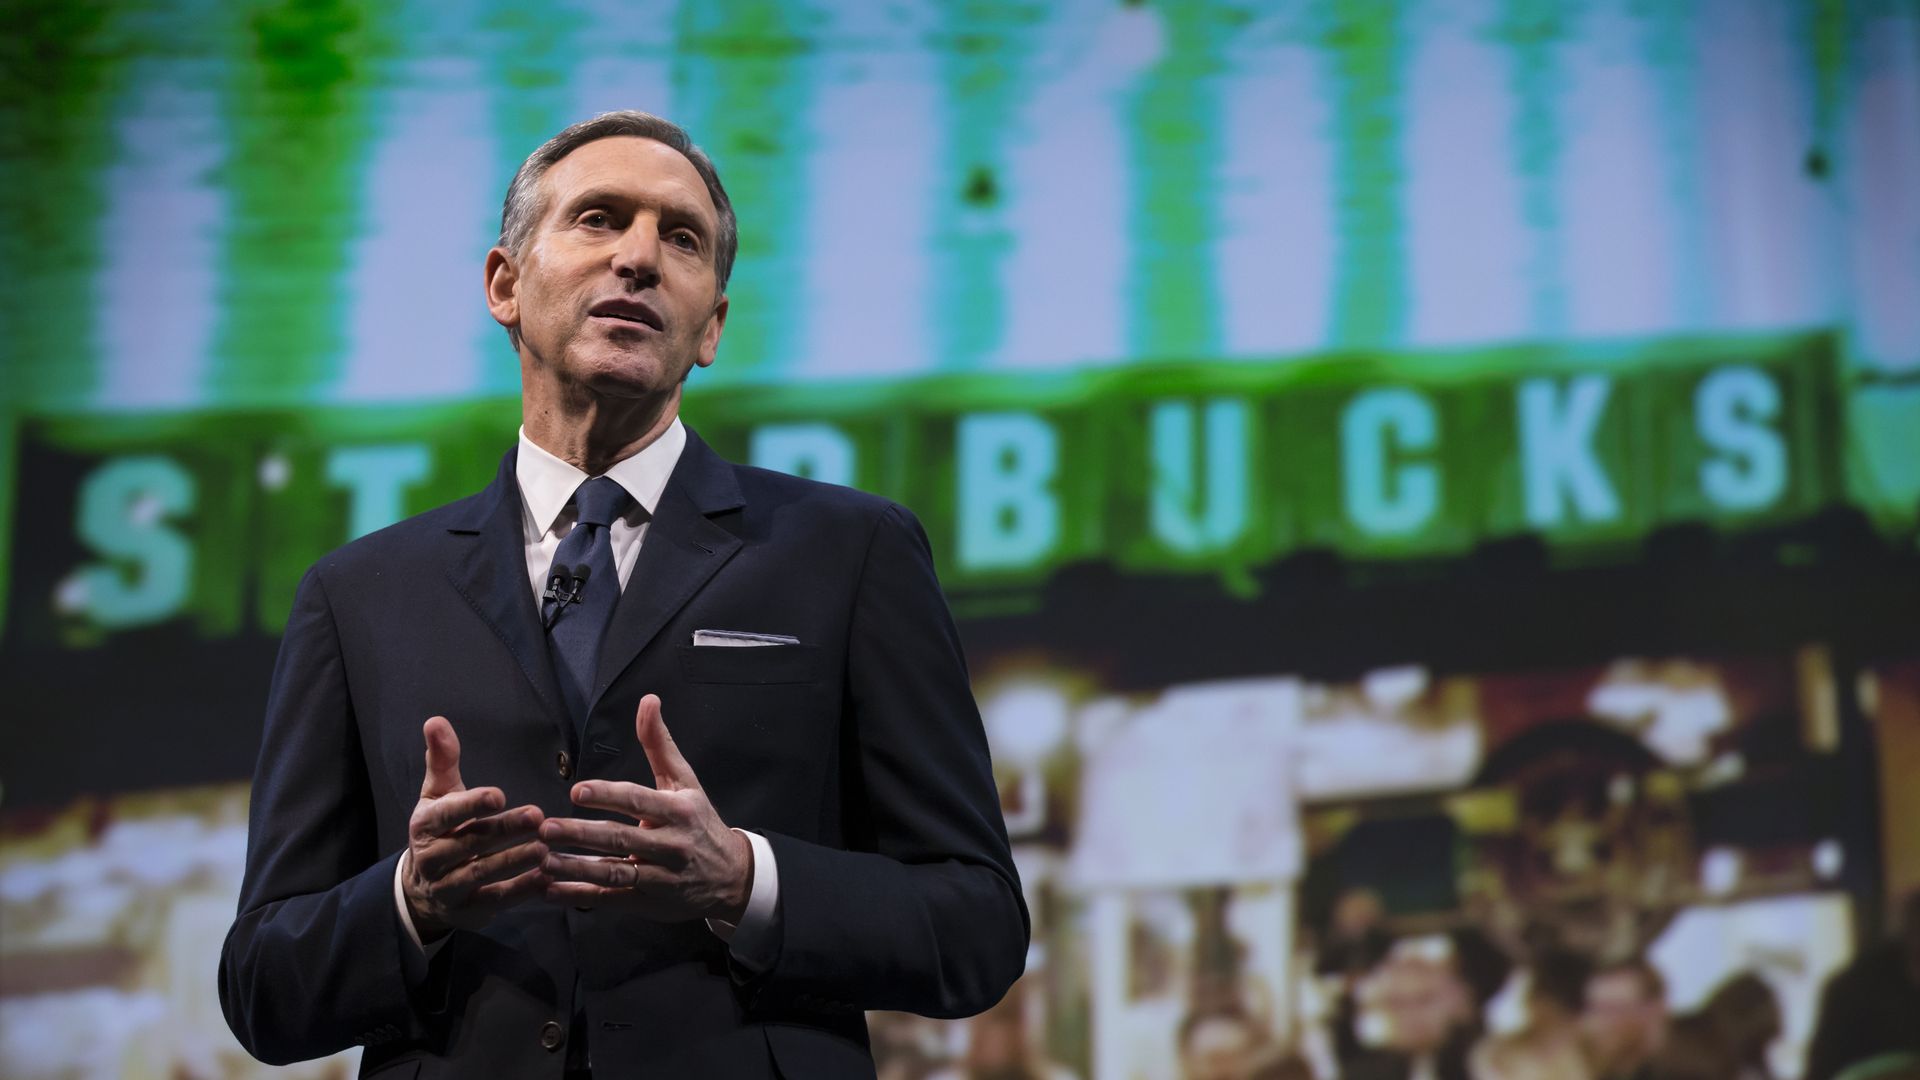 Starbucks Chairman and CEO Howard Schultz speaks during Starbucks annual shareholders meeting March 18, 2015 in Seattle, Washington. 